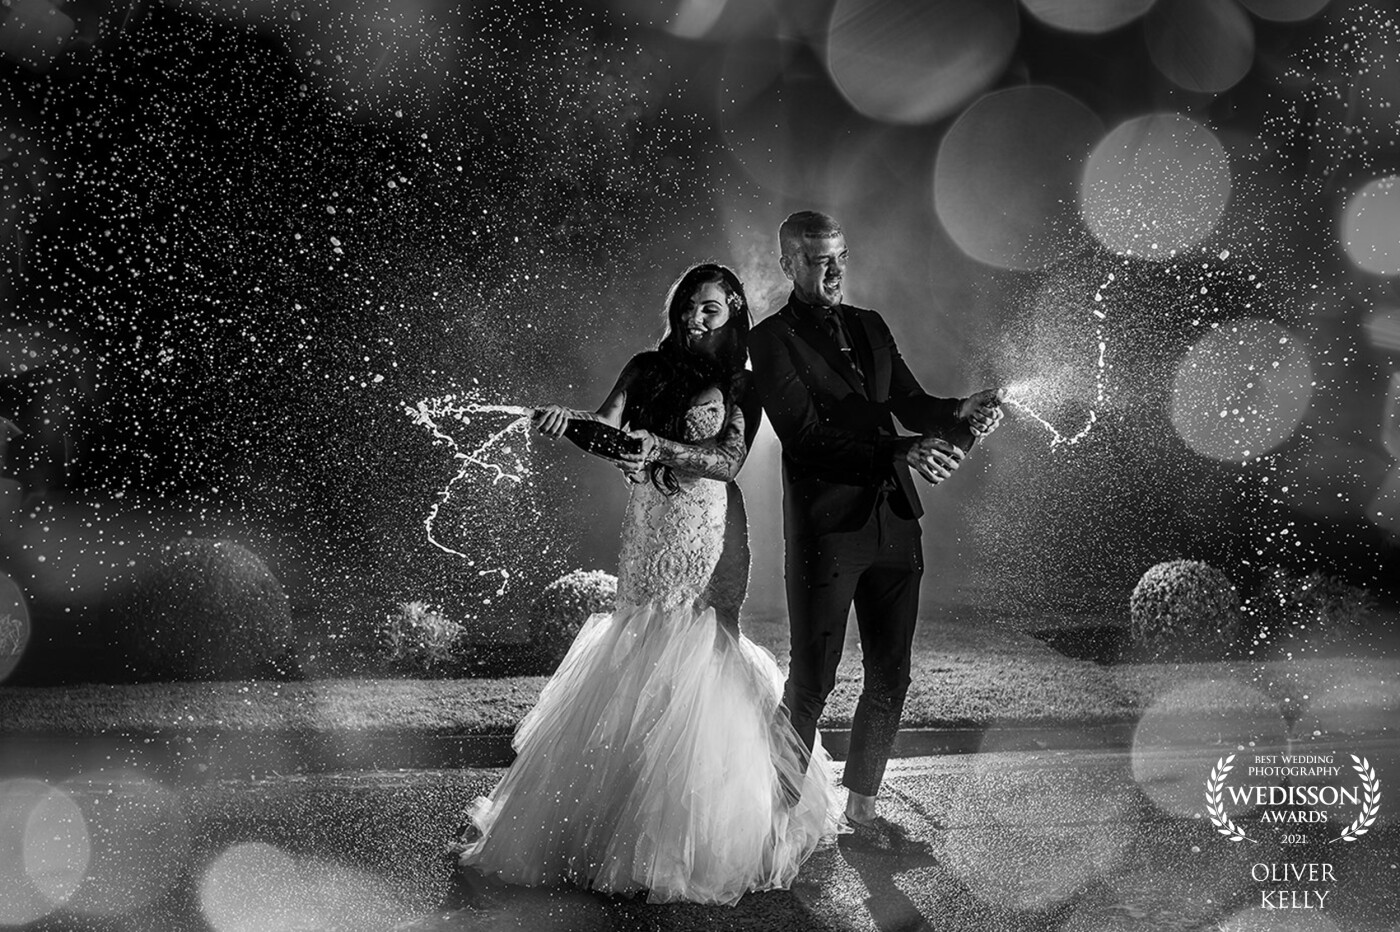 Brave the cold winter nights and put all of your trust in your wedding photographer and the results will speak for themselves! This image was taken at Mottram Hall in Cheshire using 3 Godex Ad200s to light the couple while they were absolutely loving life with the bottles of champagne!